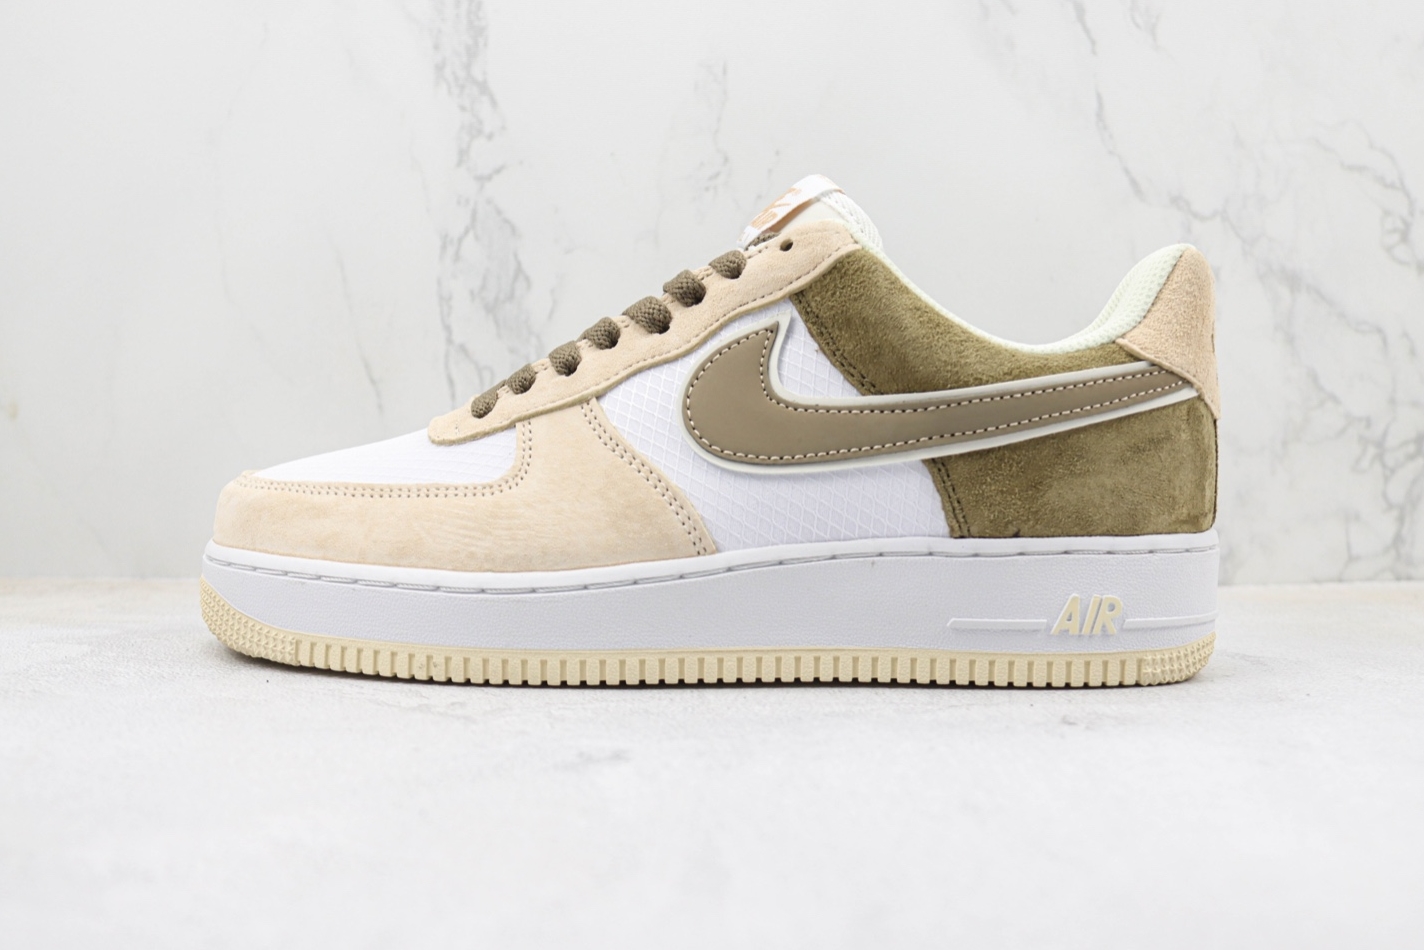 Nike Air Force 1 Low CW2288-701 Yellow Brown White Shoes